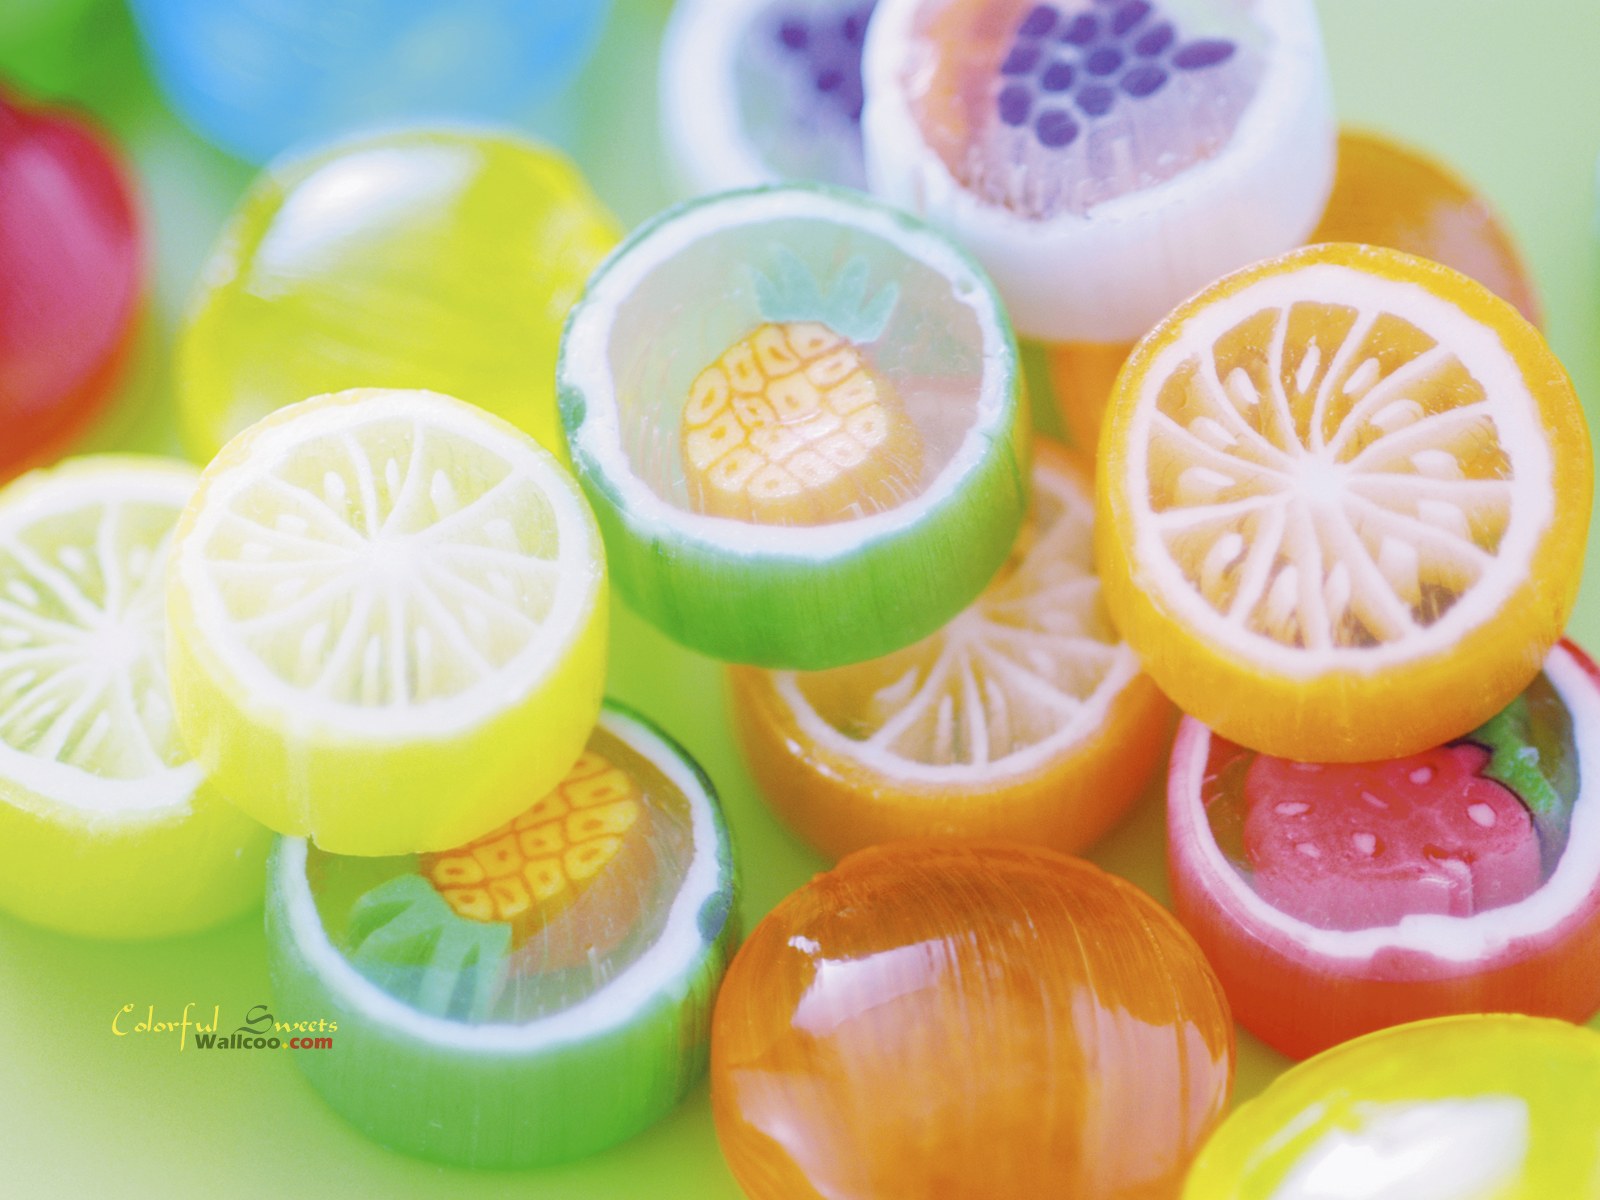 Colorful and Pastel Sweet Candies